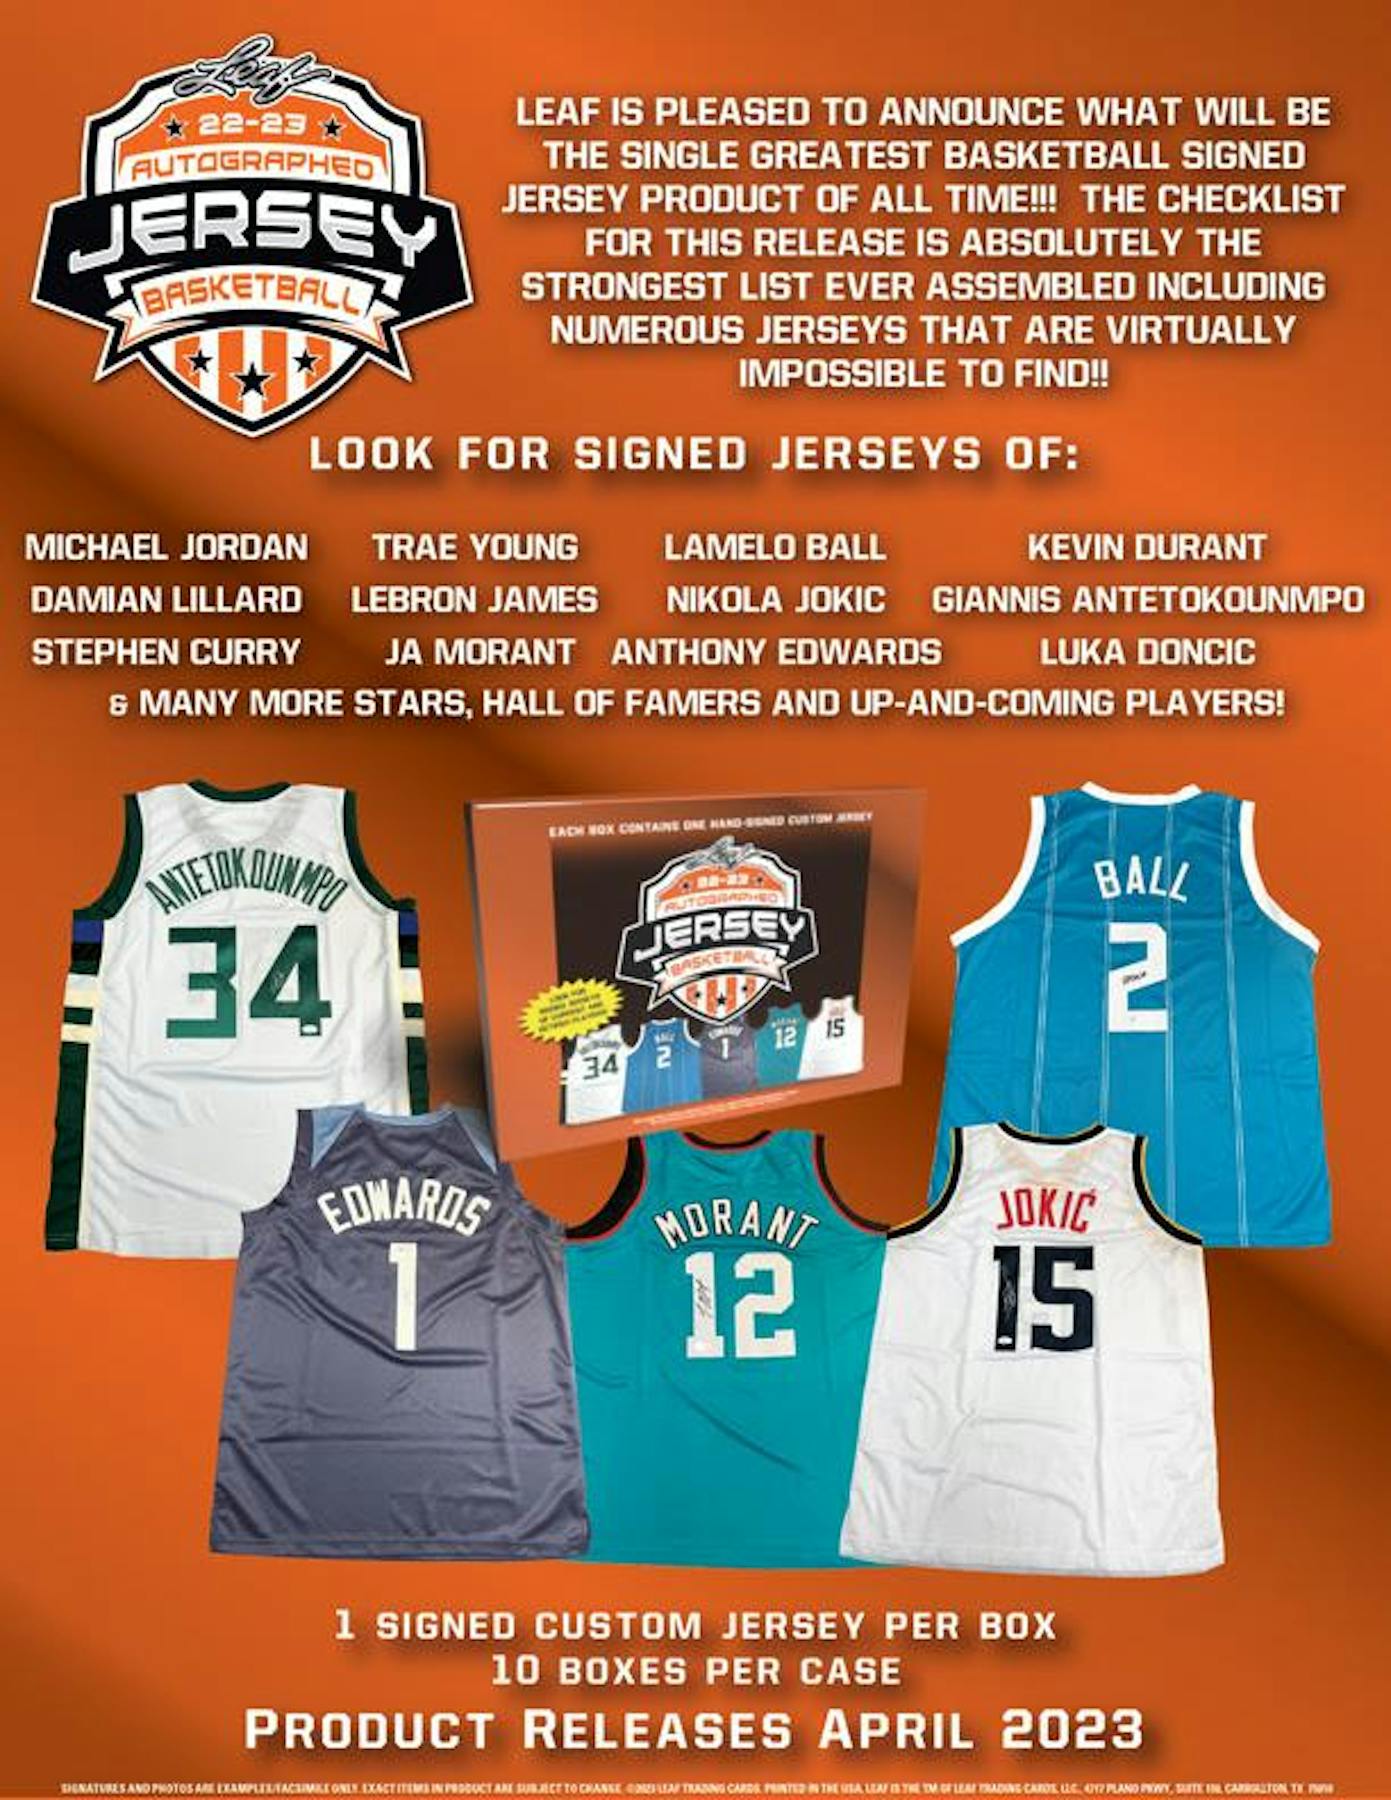 2022 Leaf Autographed Football Jersey Set Info, Boxes, Checklist, Date